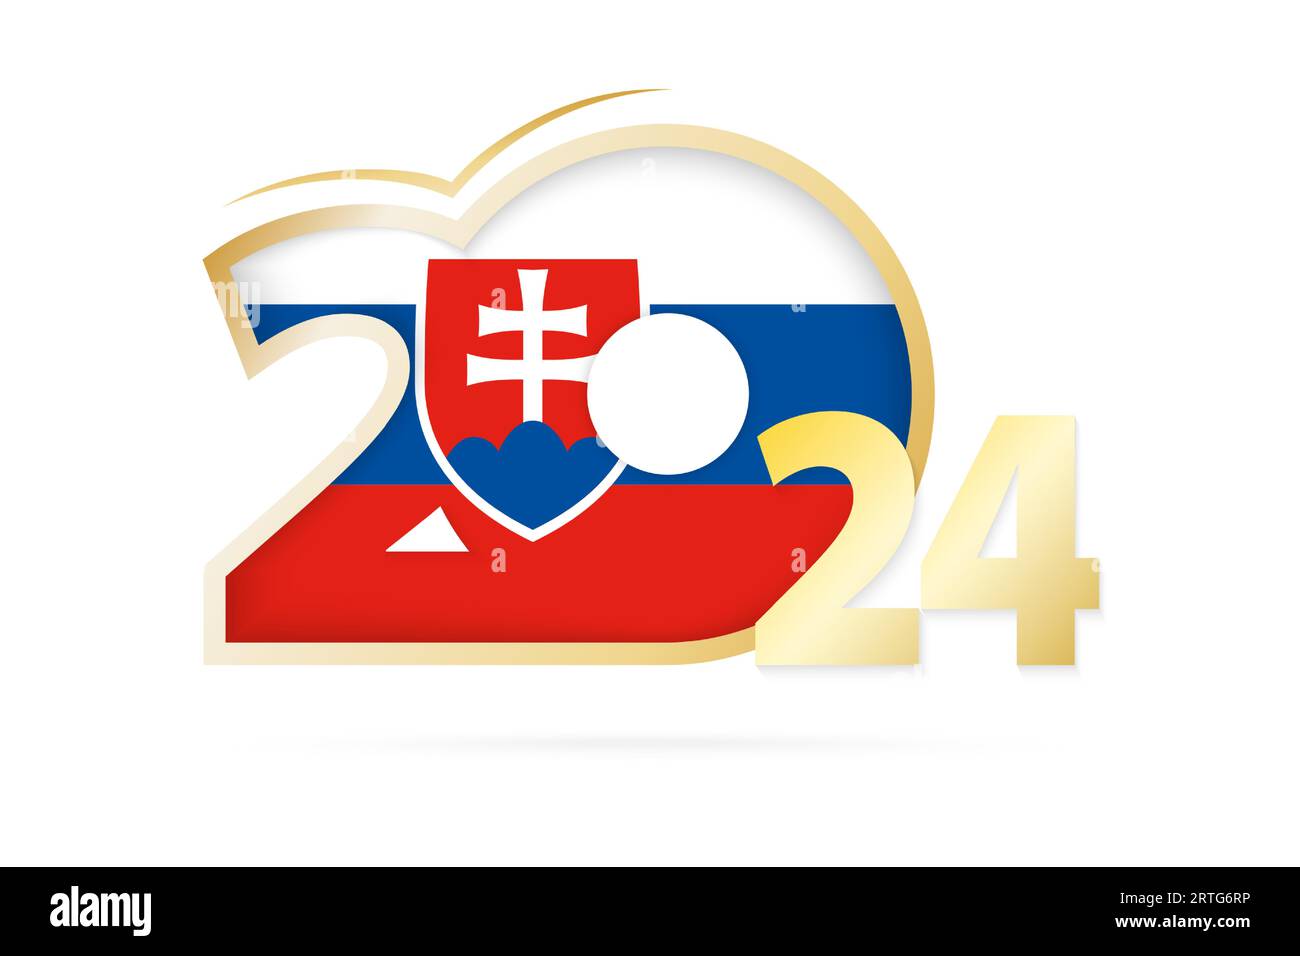 Year 2024 With Slovakia Flag Pattern Vector Illustration 2RTG6RP 